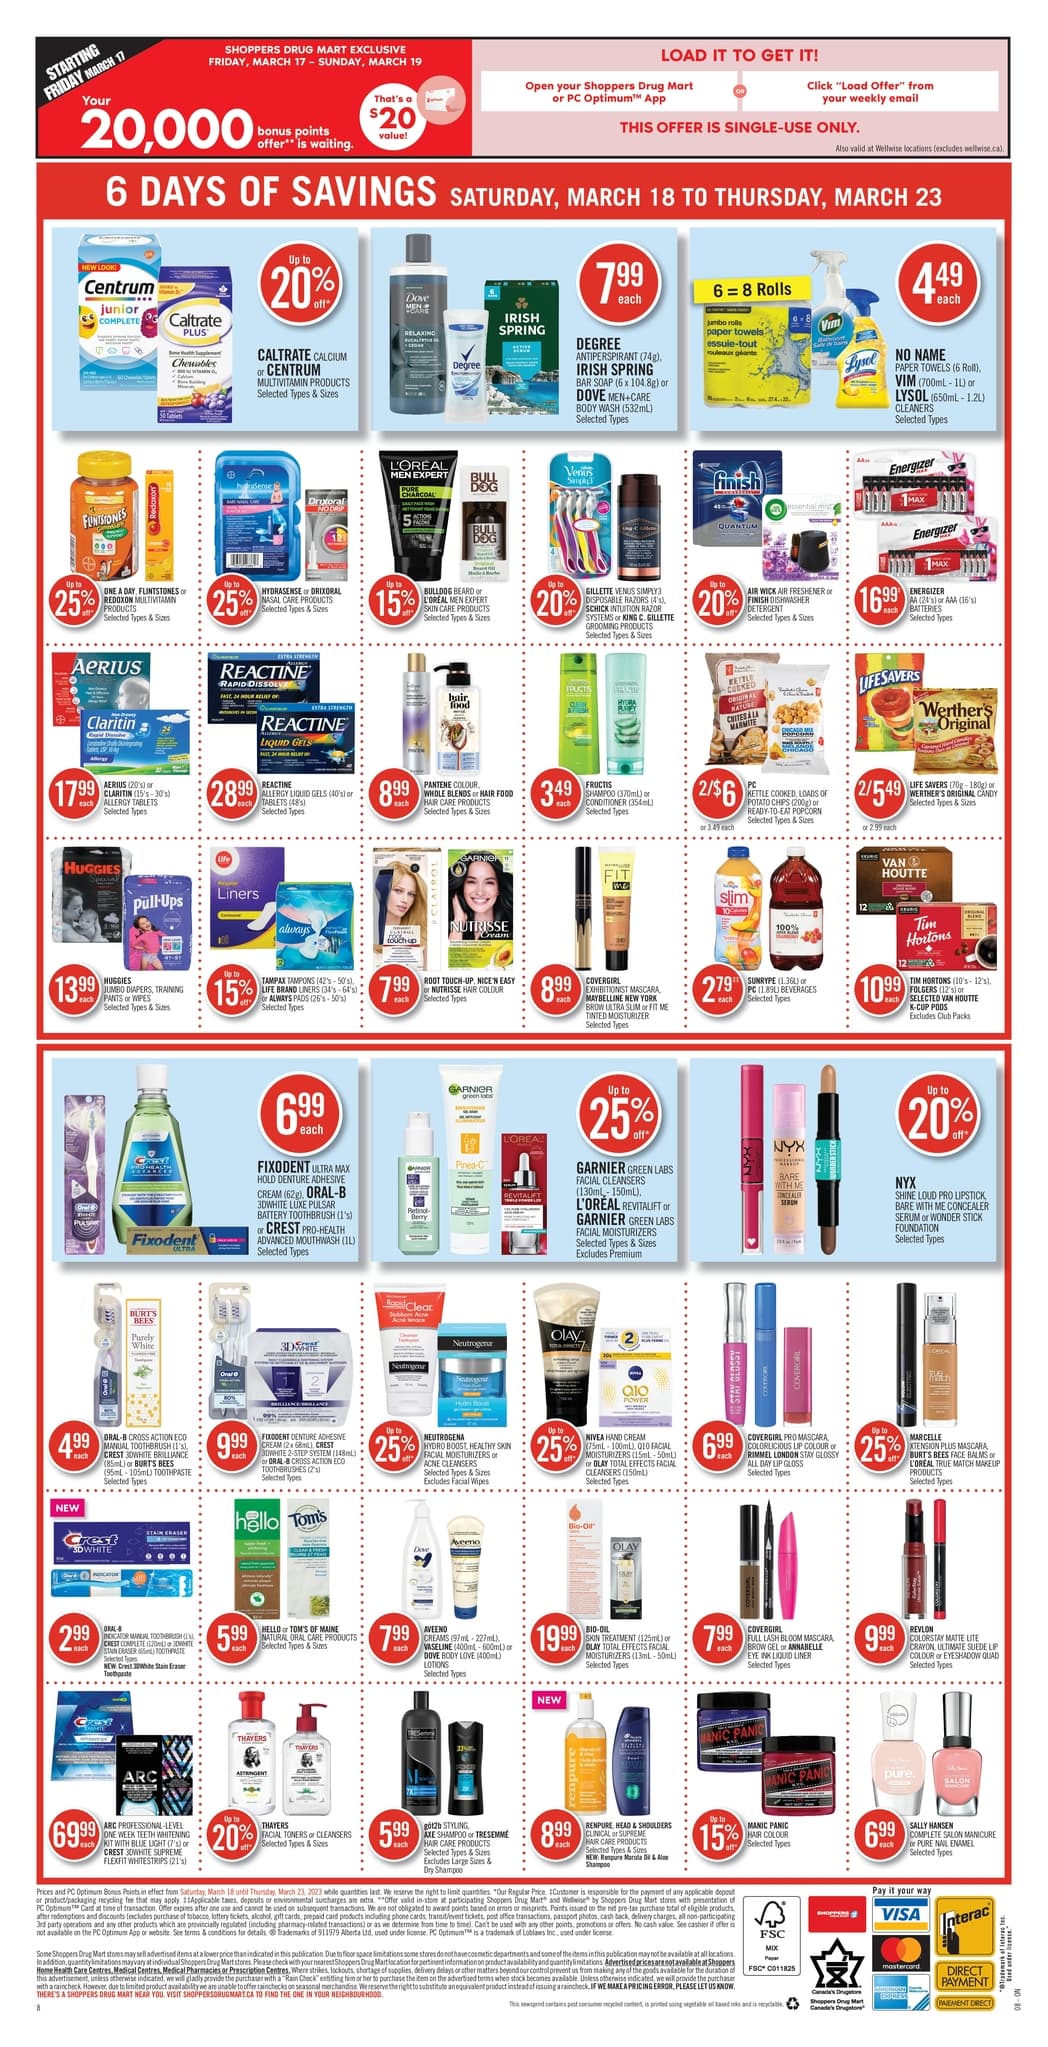 Shoppers Drug Mart - Weekly Flyer Specials - Page 14